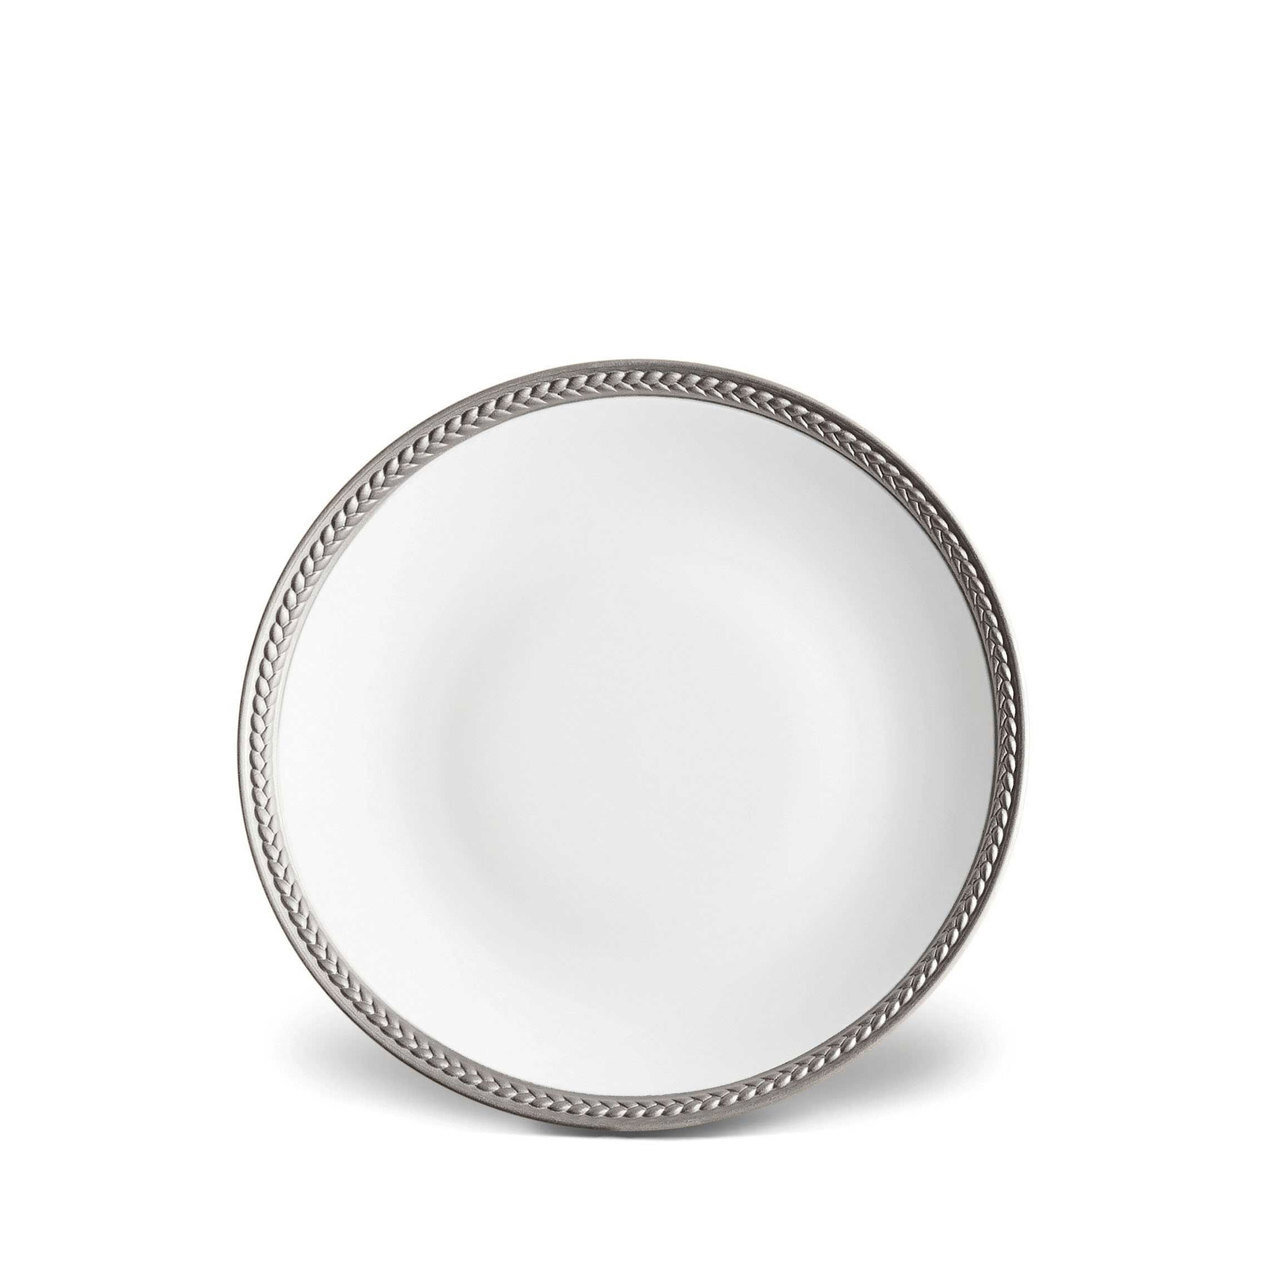 L'Objet Soie Tressee Bread and Butter Plate Platinum